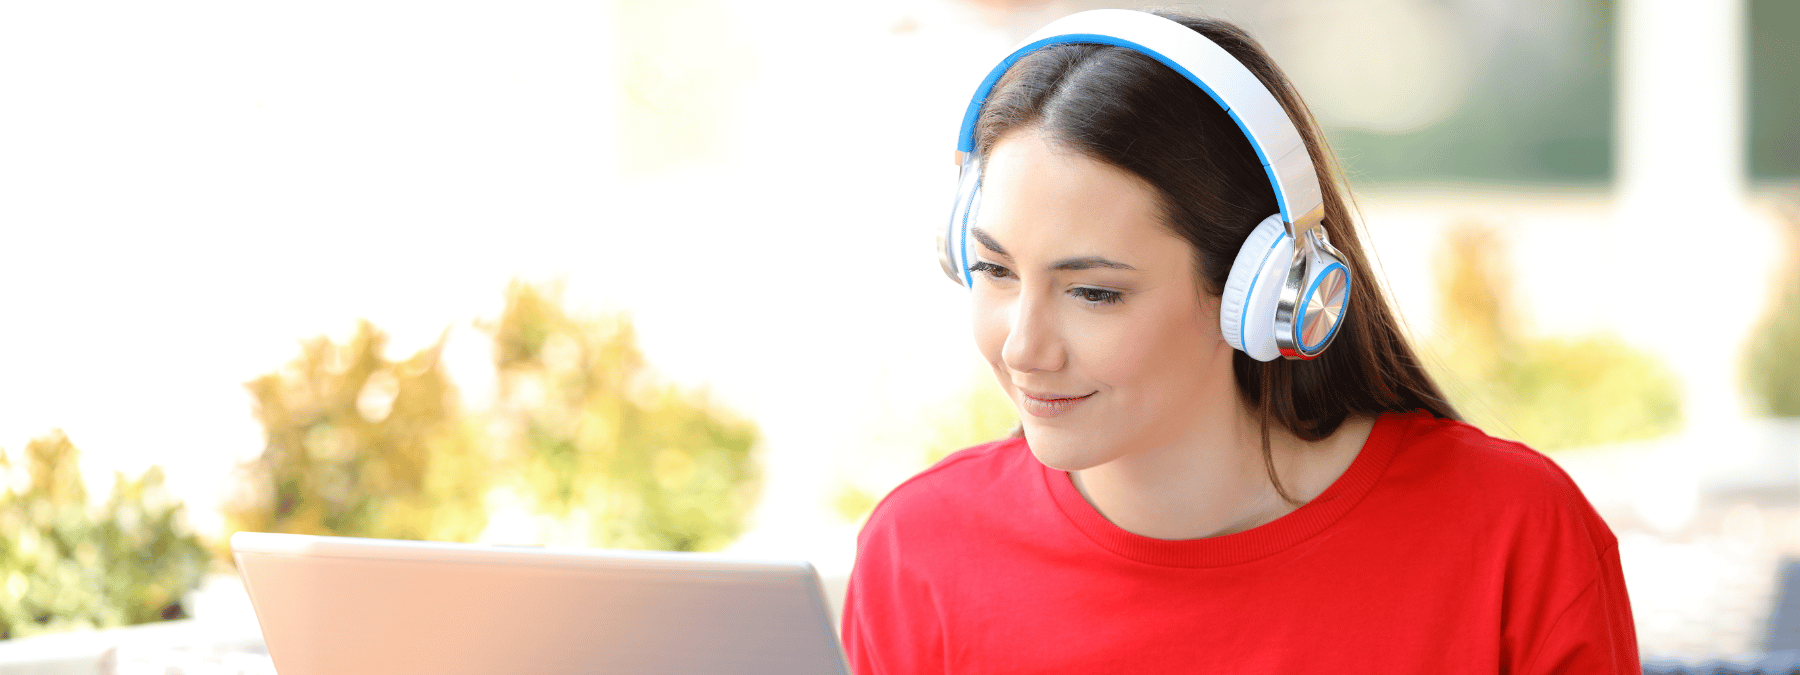 The most popular working from home songs